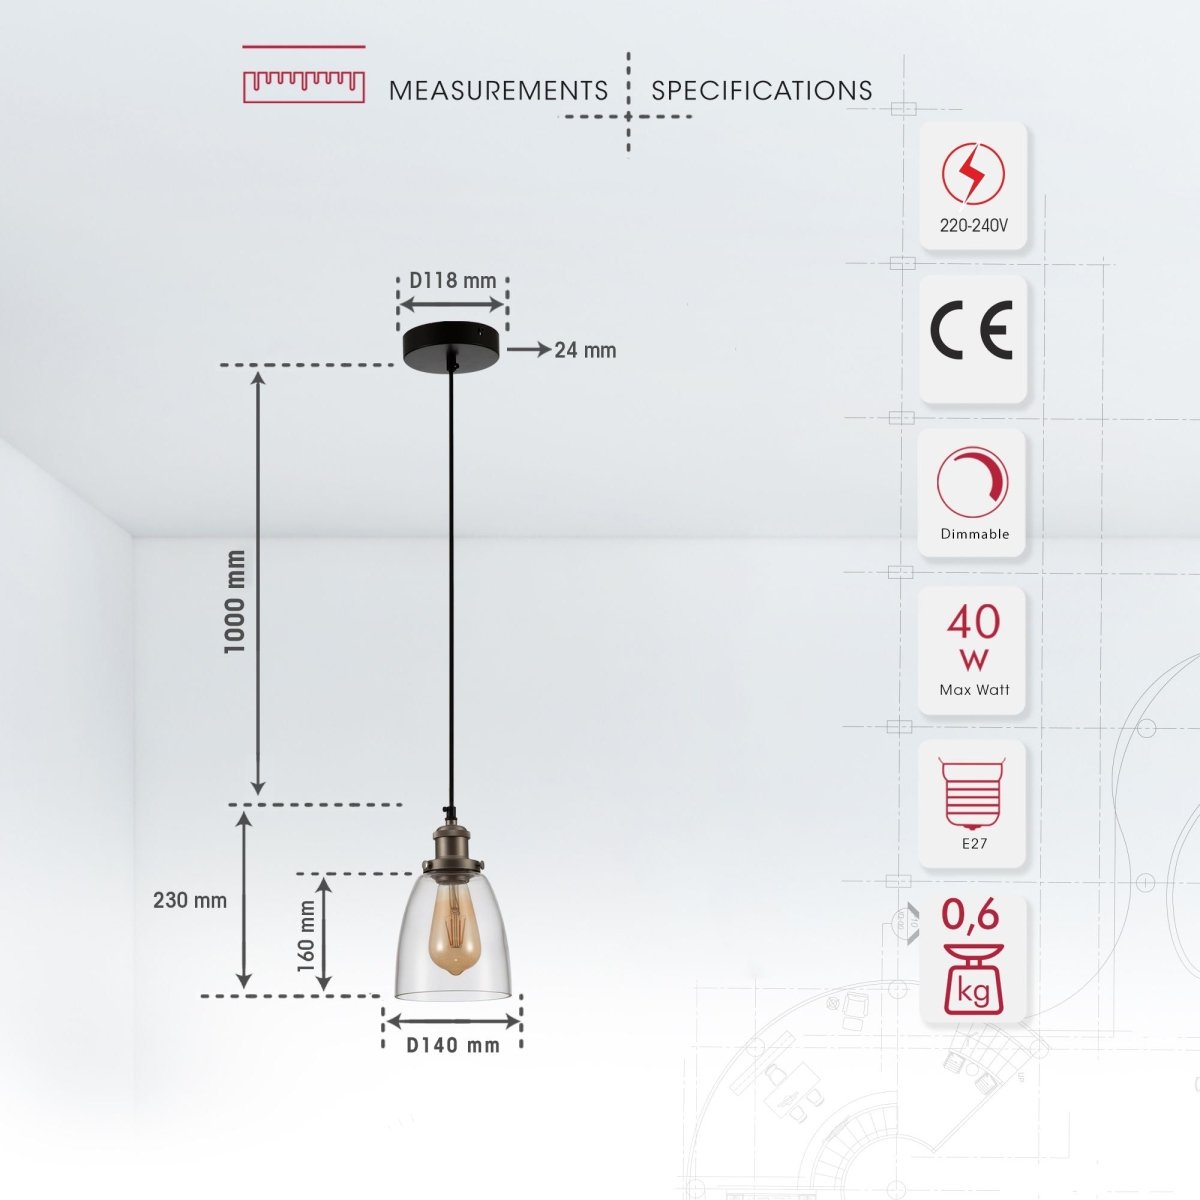 Product dimensions of silver metal clear glass cone pendant light with e27 fitting